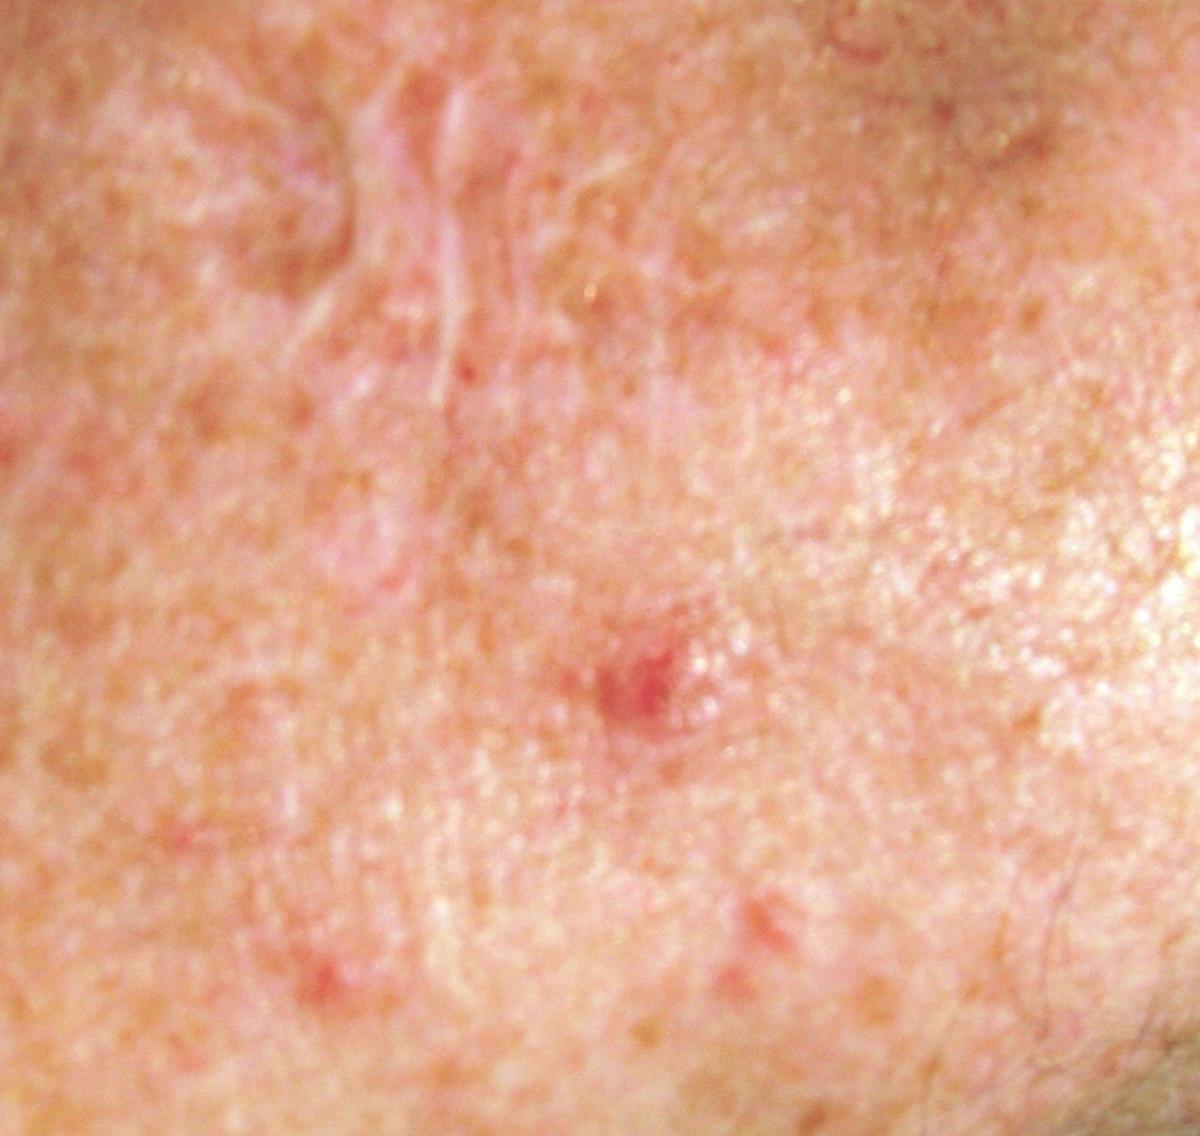 Basal Cell Carcinoma Home Remedy Perrin's Blend